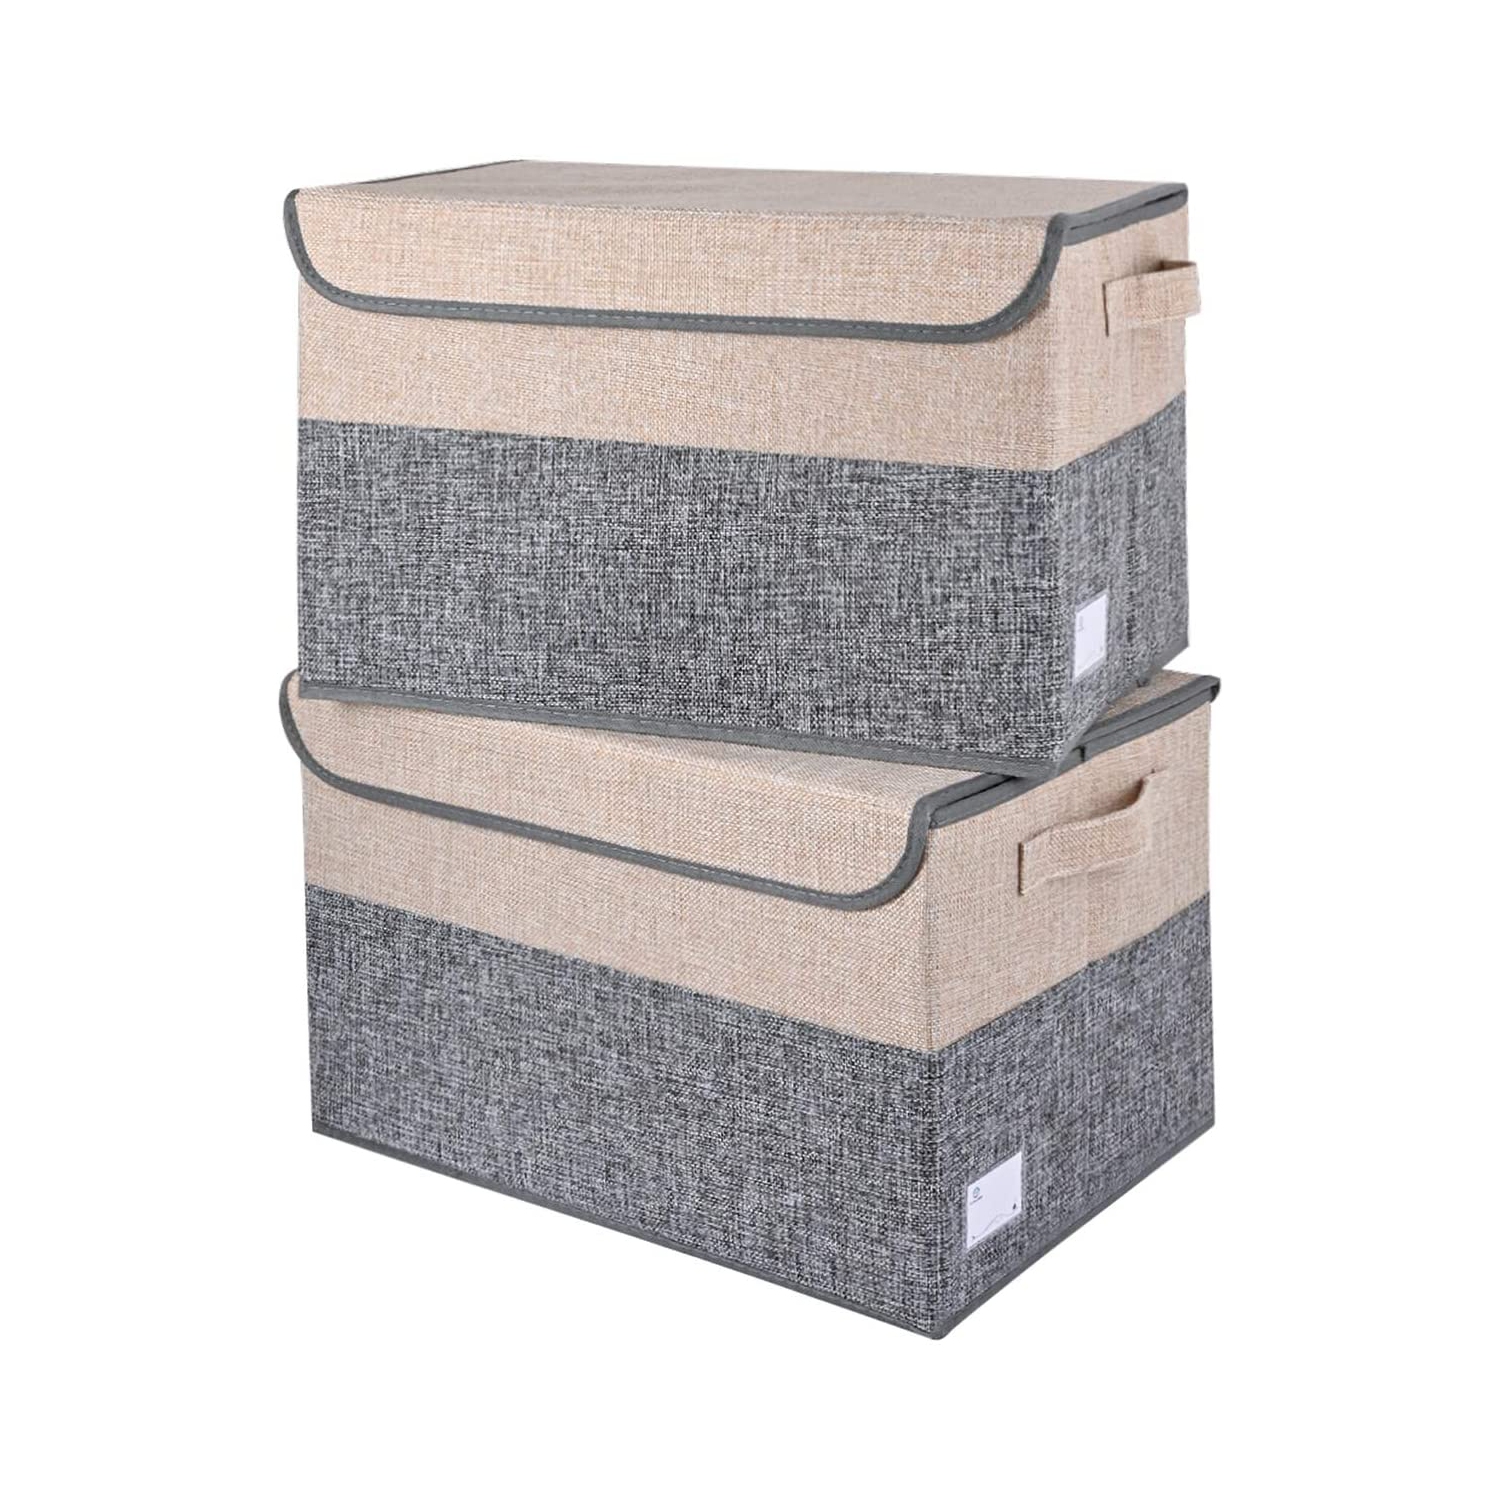 Univivi Storage Baskets for Cube Units,Two Handles are Easy to Carry，Foldable Fabric Storage Basket 26 x 26cm，Gray 